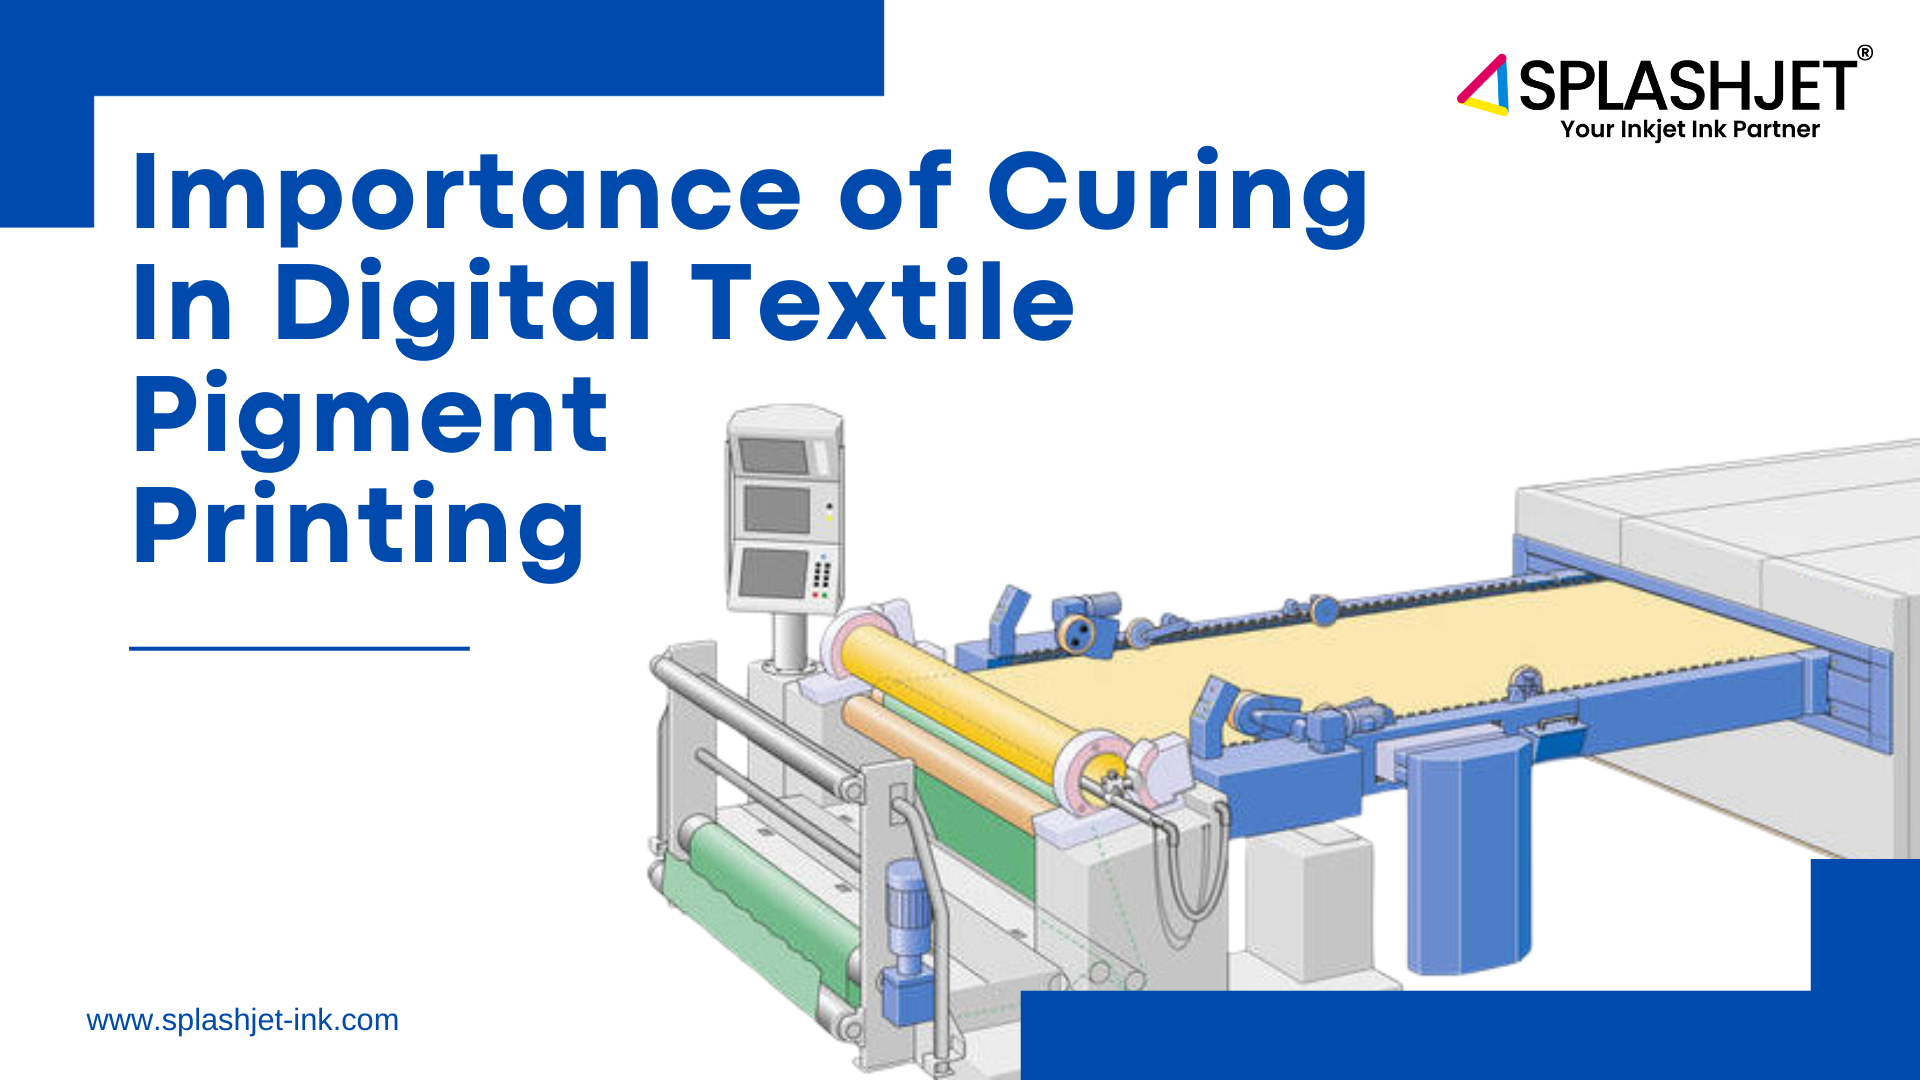 Importance of Curing in Digital Textile Pigment Printing